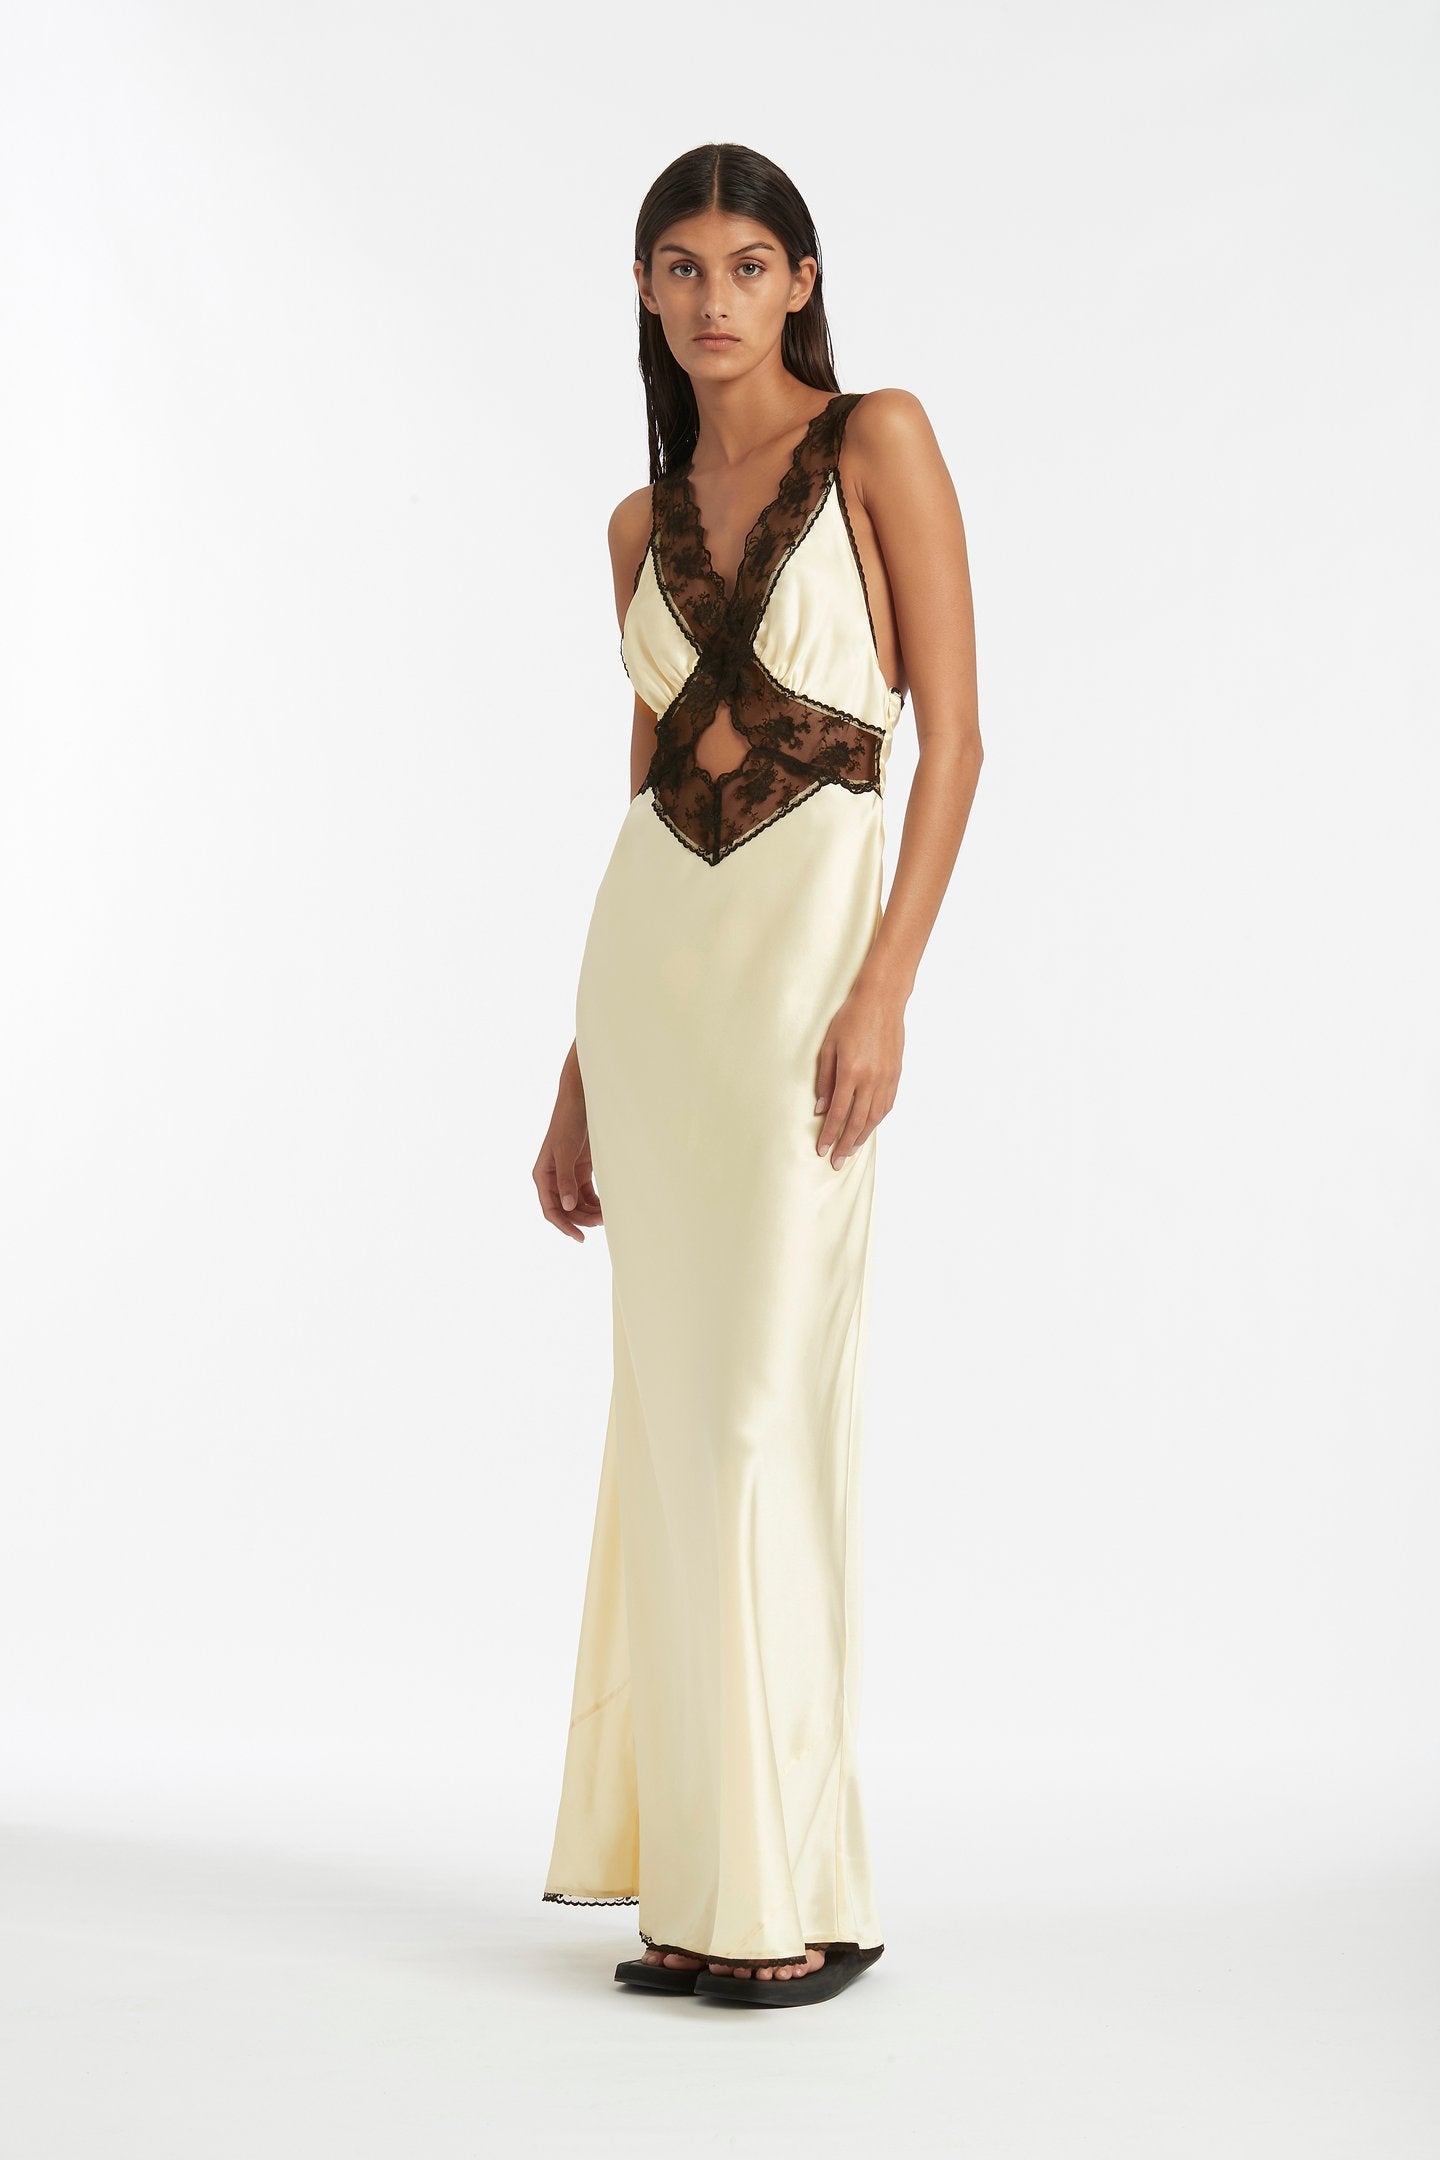 SIR - WILLA CUT OUT GOWN - WHITE